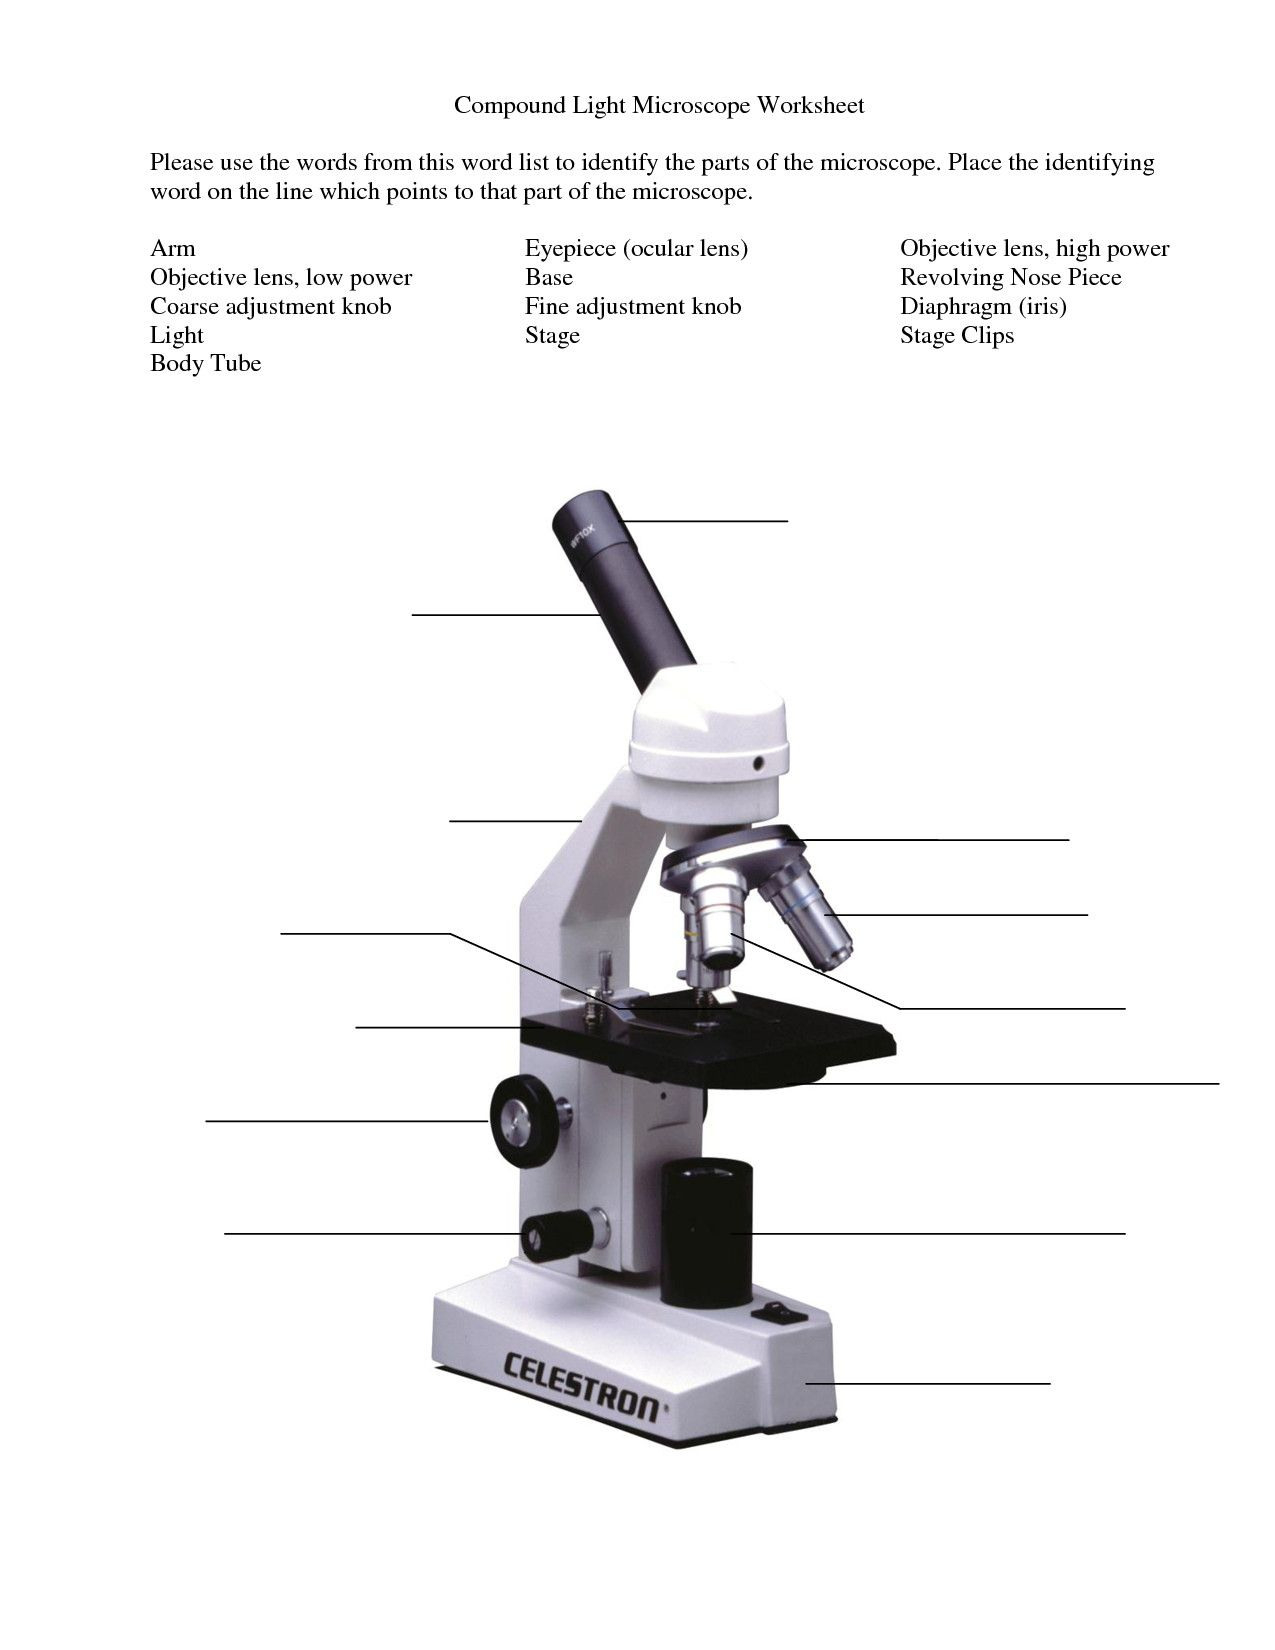 Microscope Parts And Use Worksheet Key